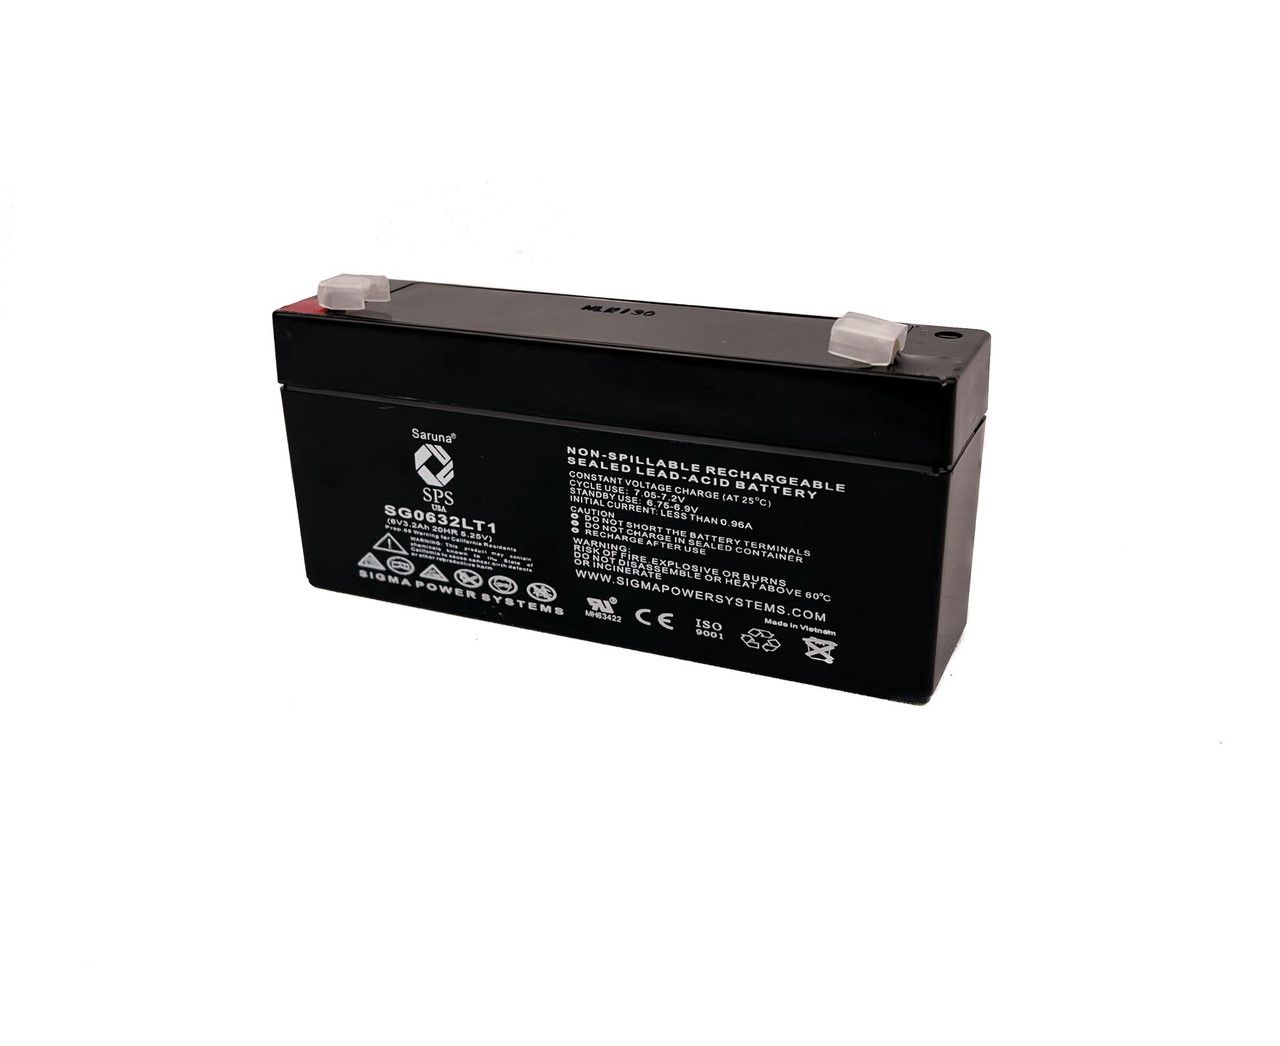 Raion Power 6V 3.2Ah Non-Spillable Replacement Rechargebale Battery for Sentry PM630